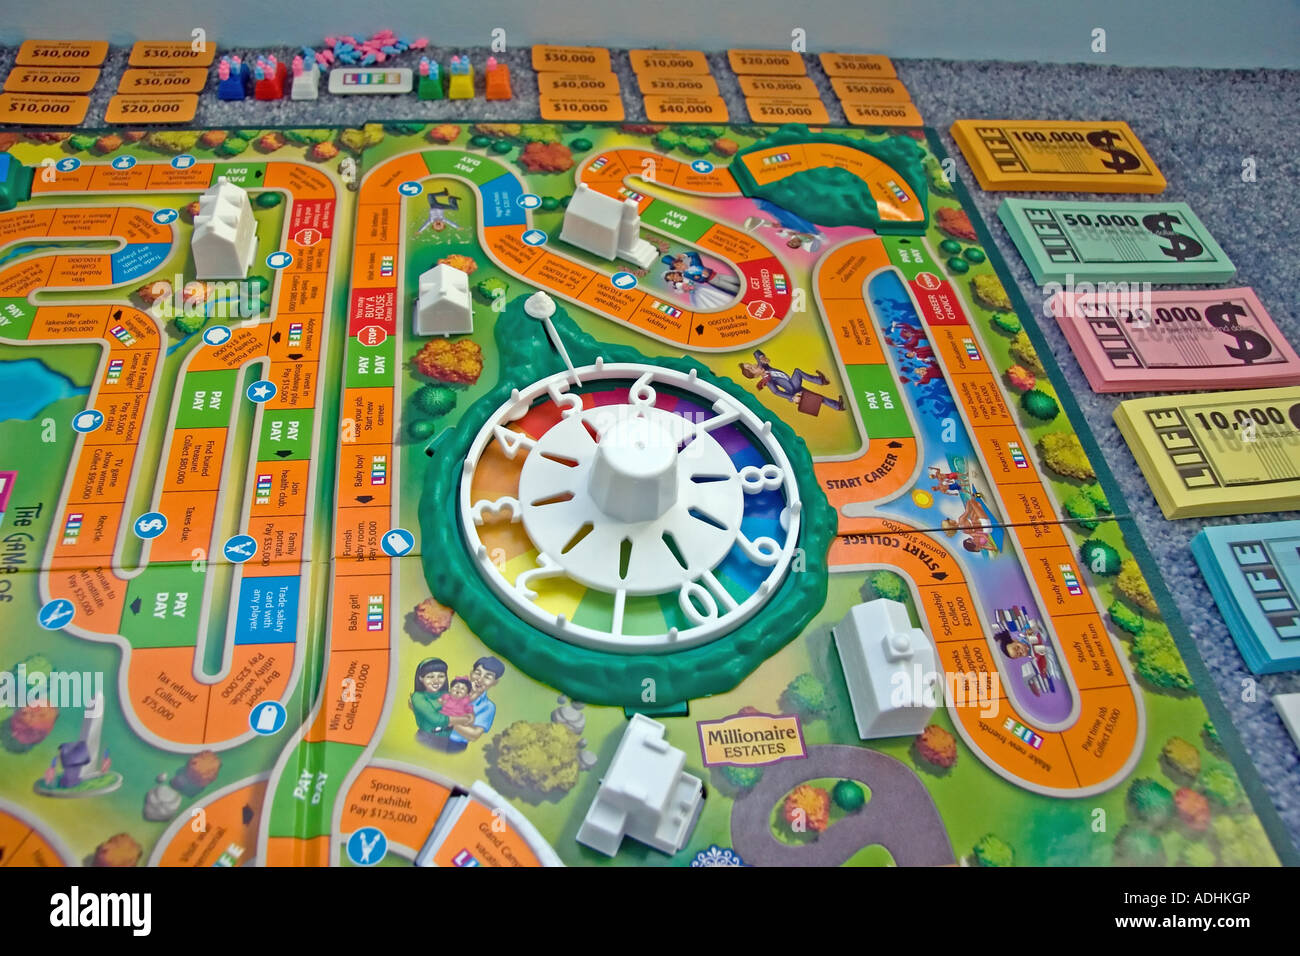 All About That Game Life "The Game of Life" by Milton Bradley. The game board & all its' Stock